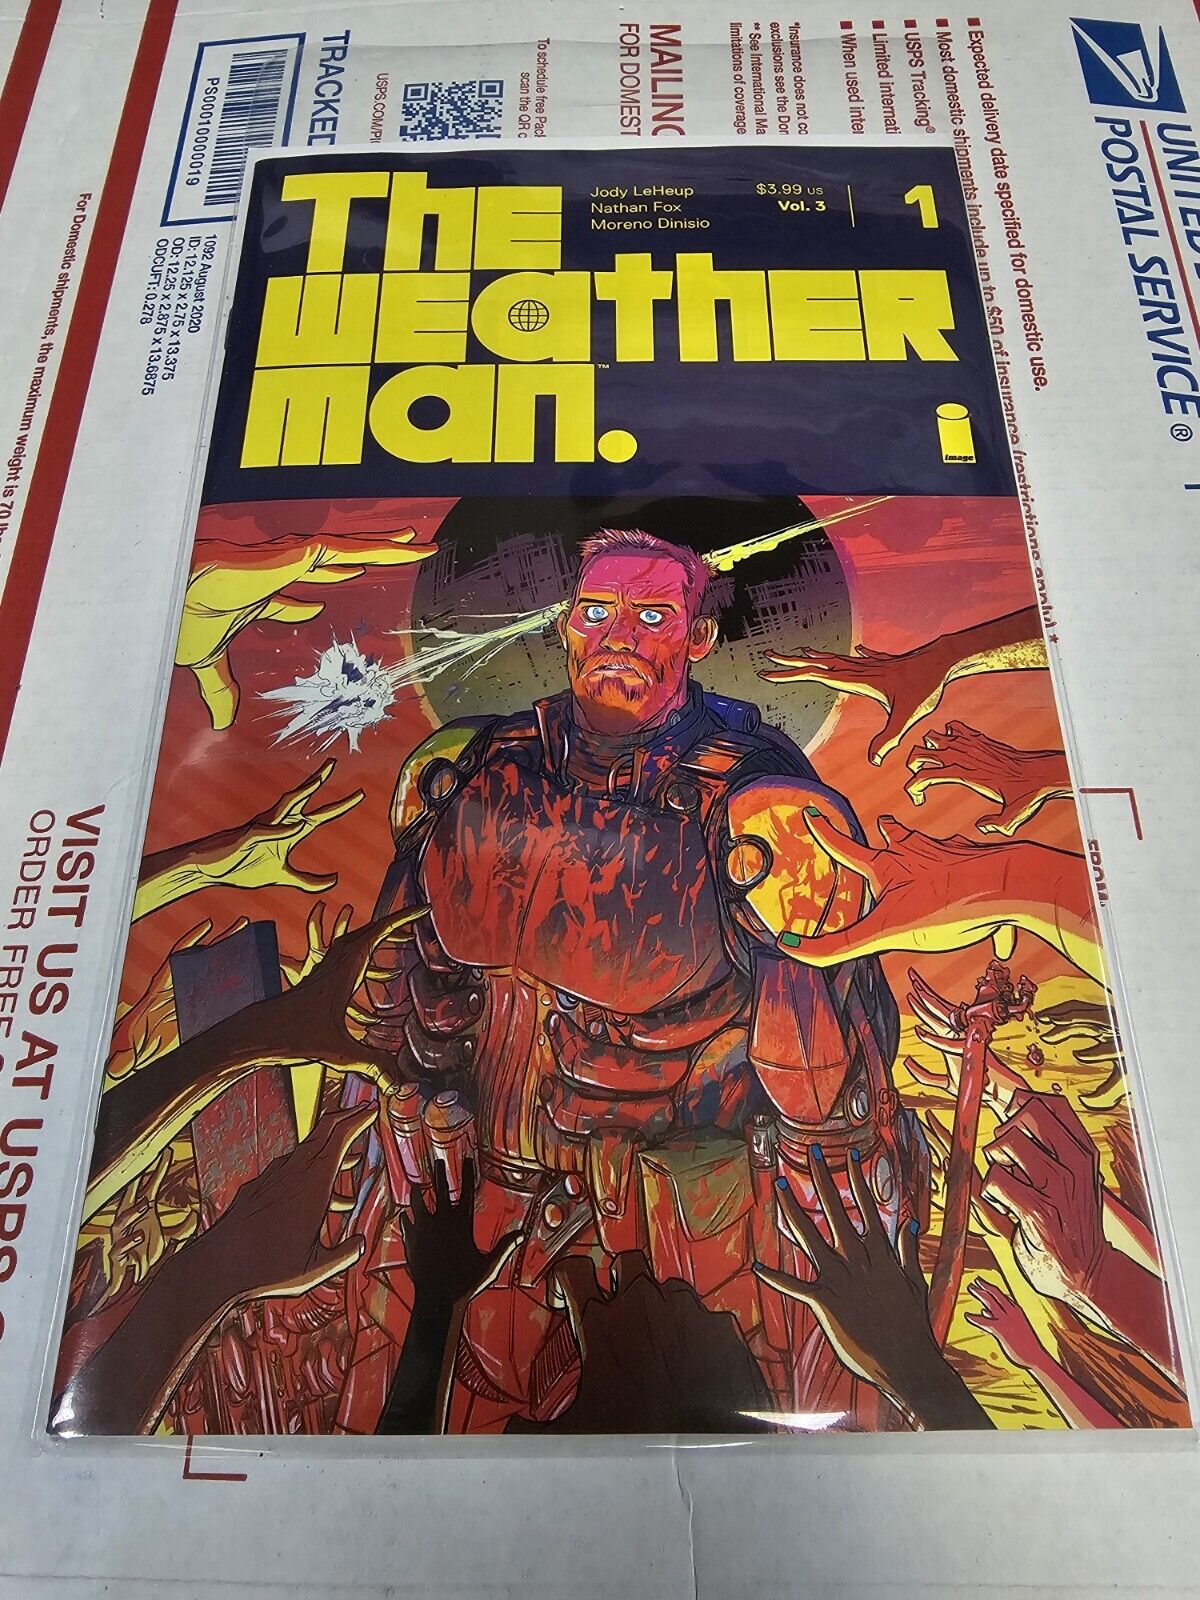 The Weather Man volume 3 ISSUE 1 Image NM- OR BETTER